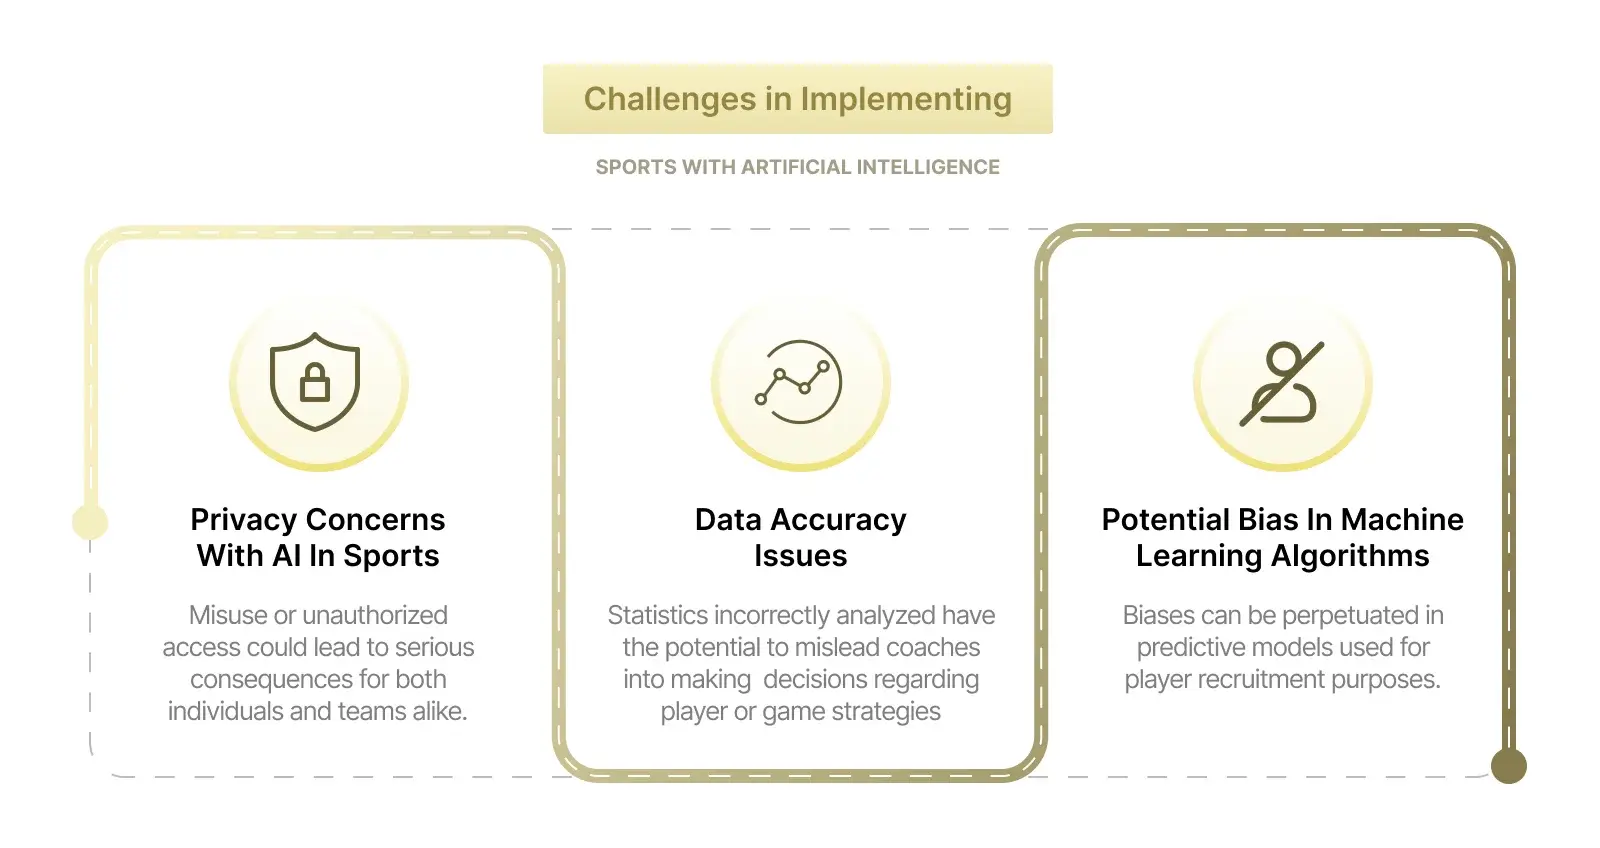 Ethical Considerations & Challenges in Implementing AI in sports